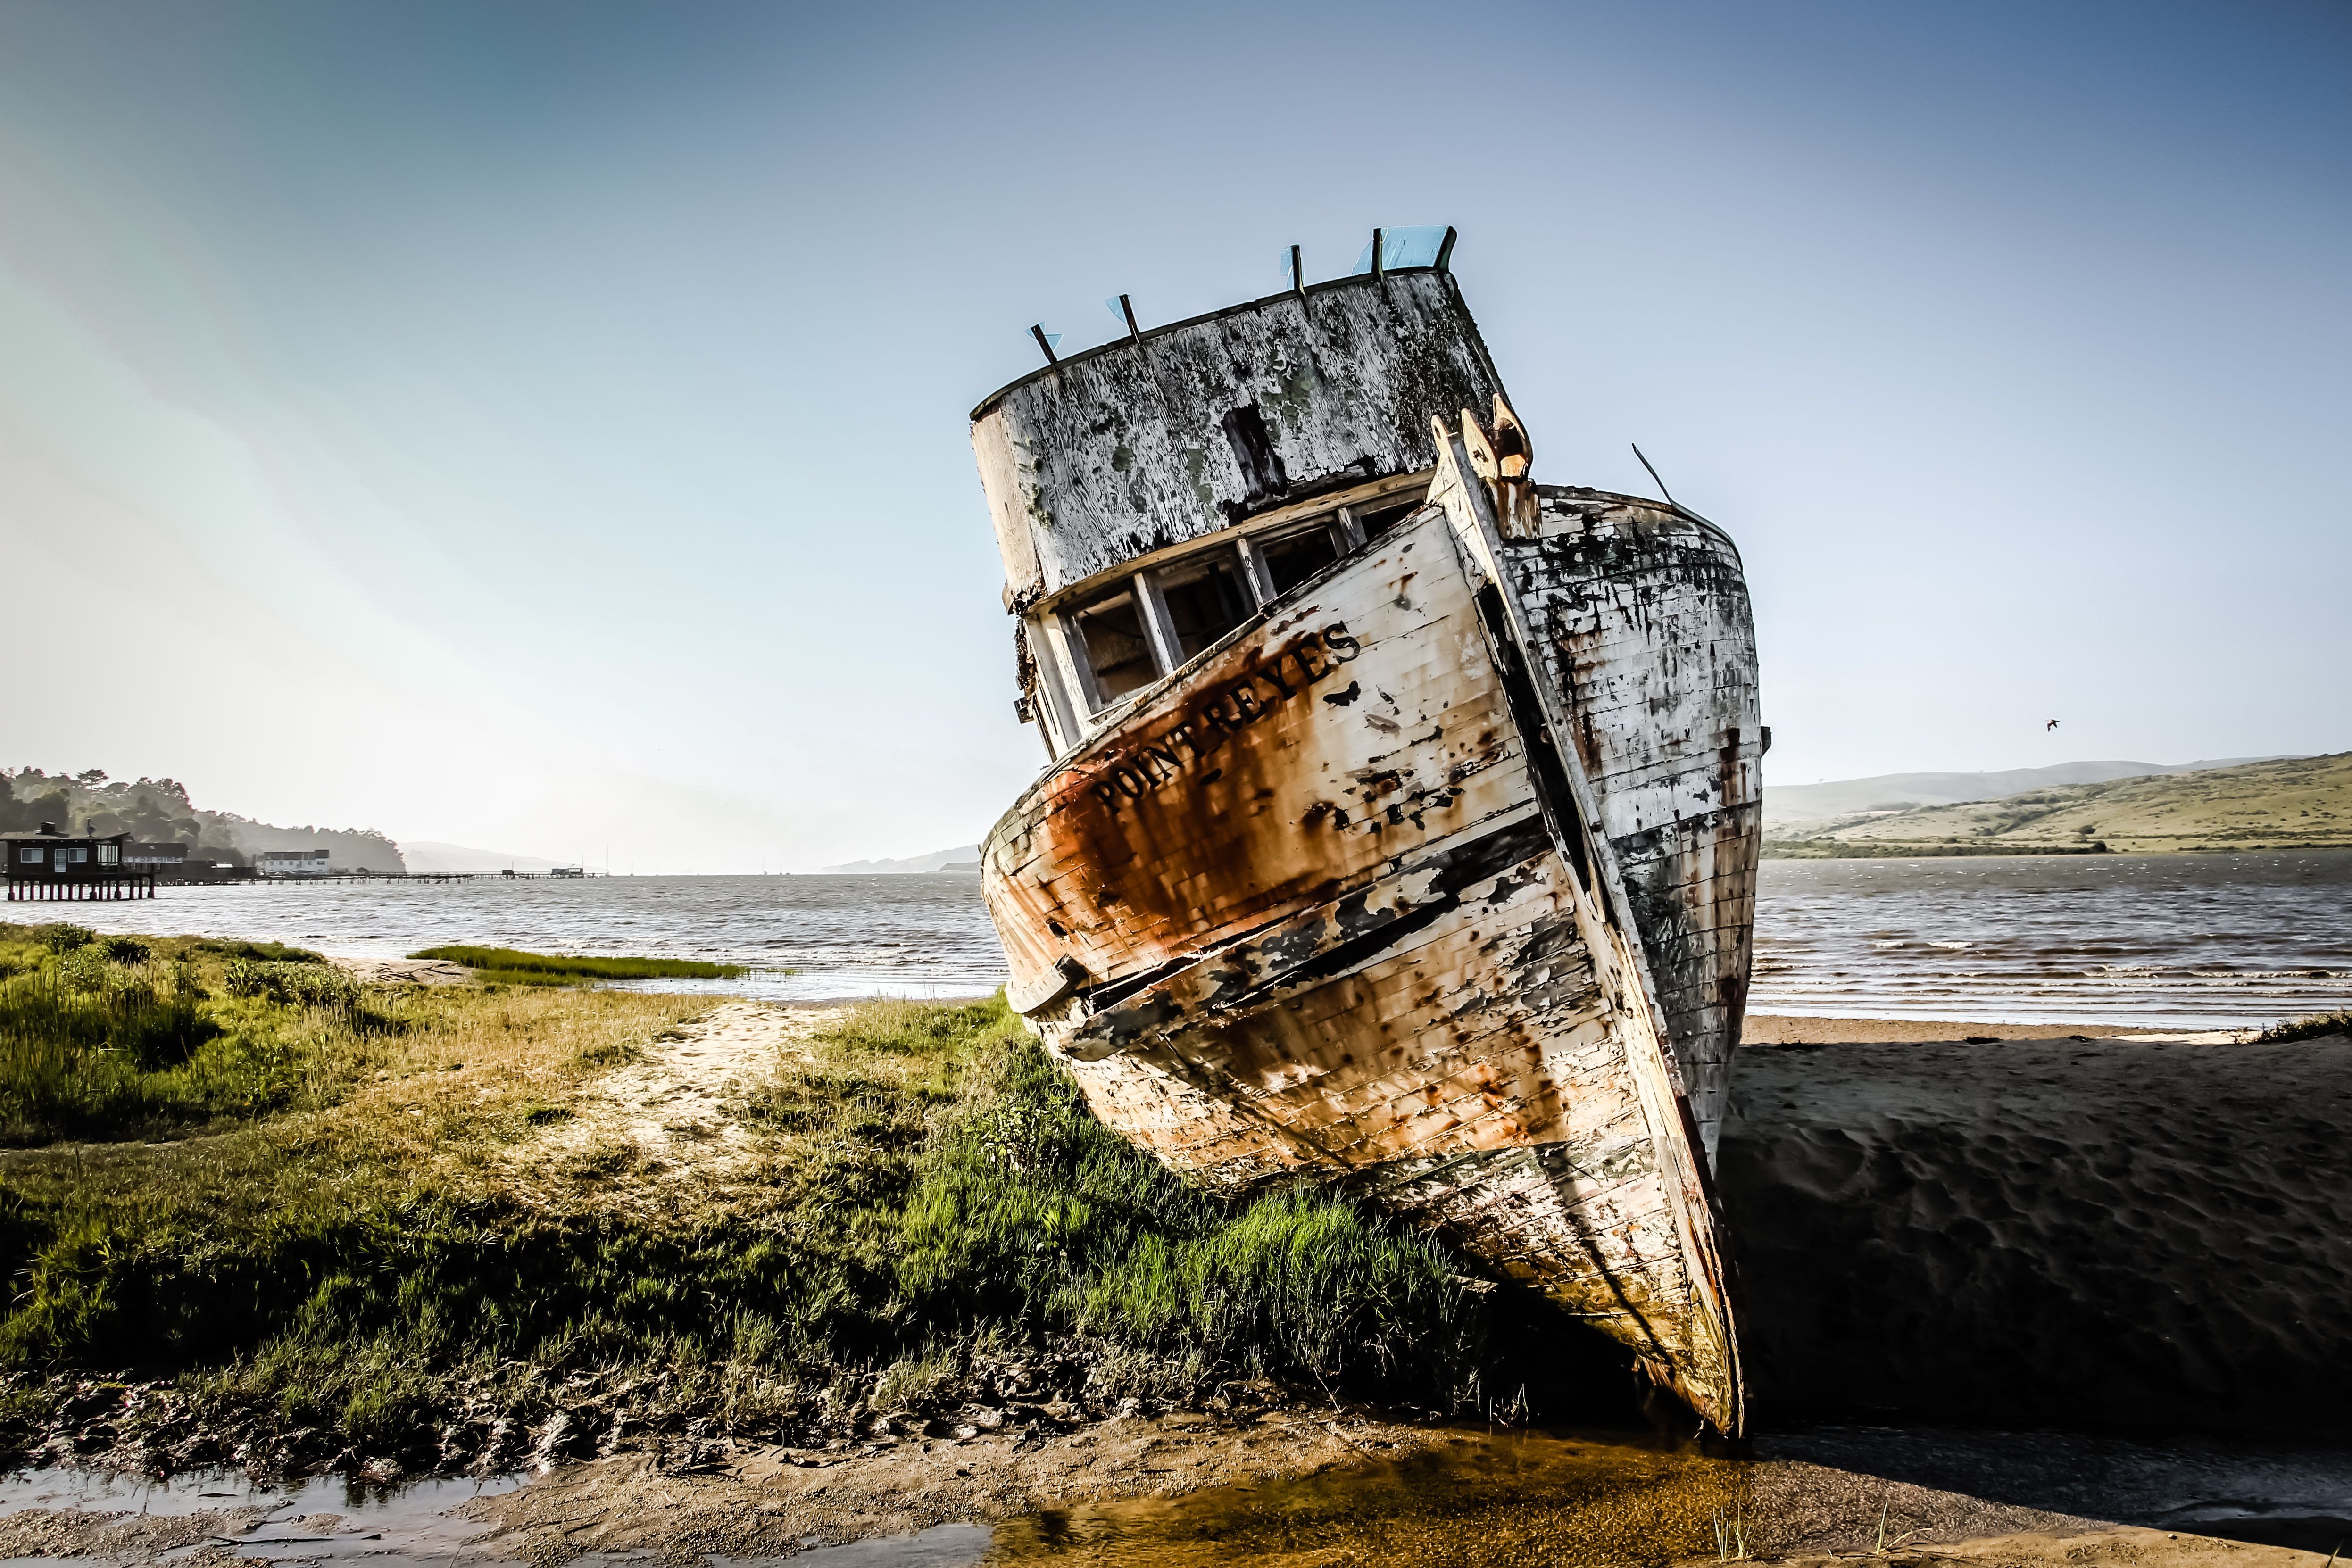 Wallpaper Download: The Point Reyes shipwreck (con imágenes)